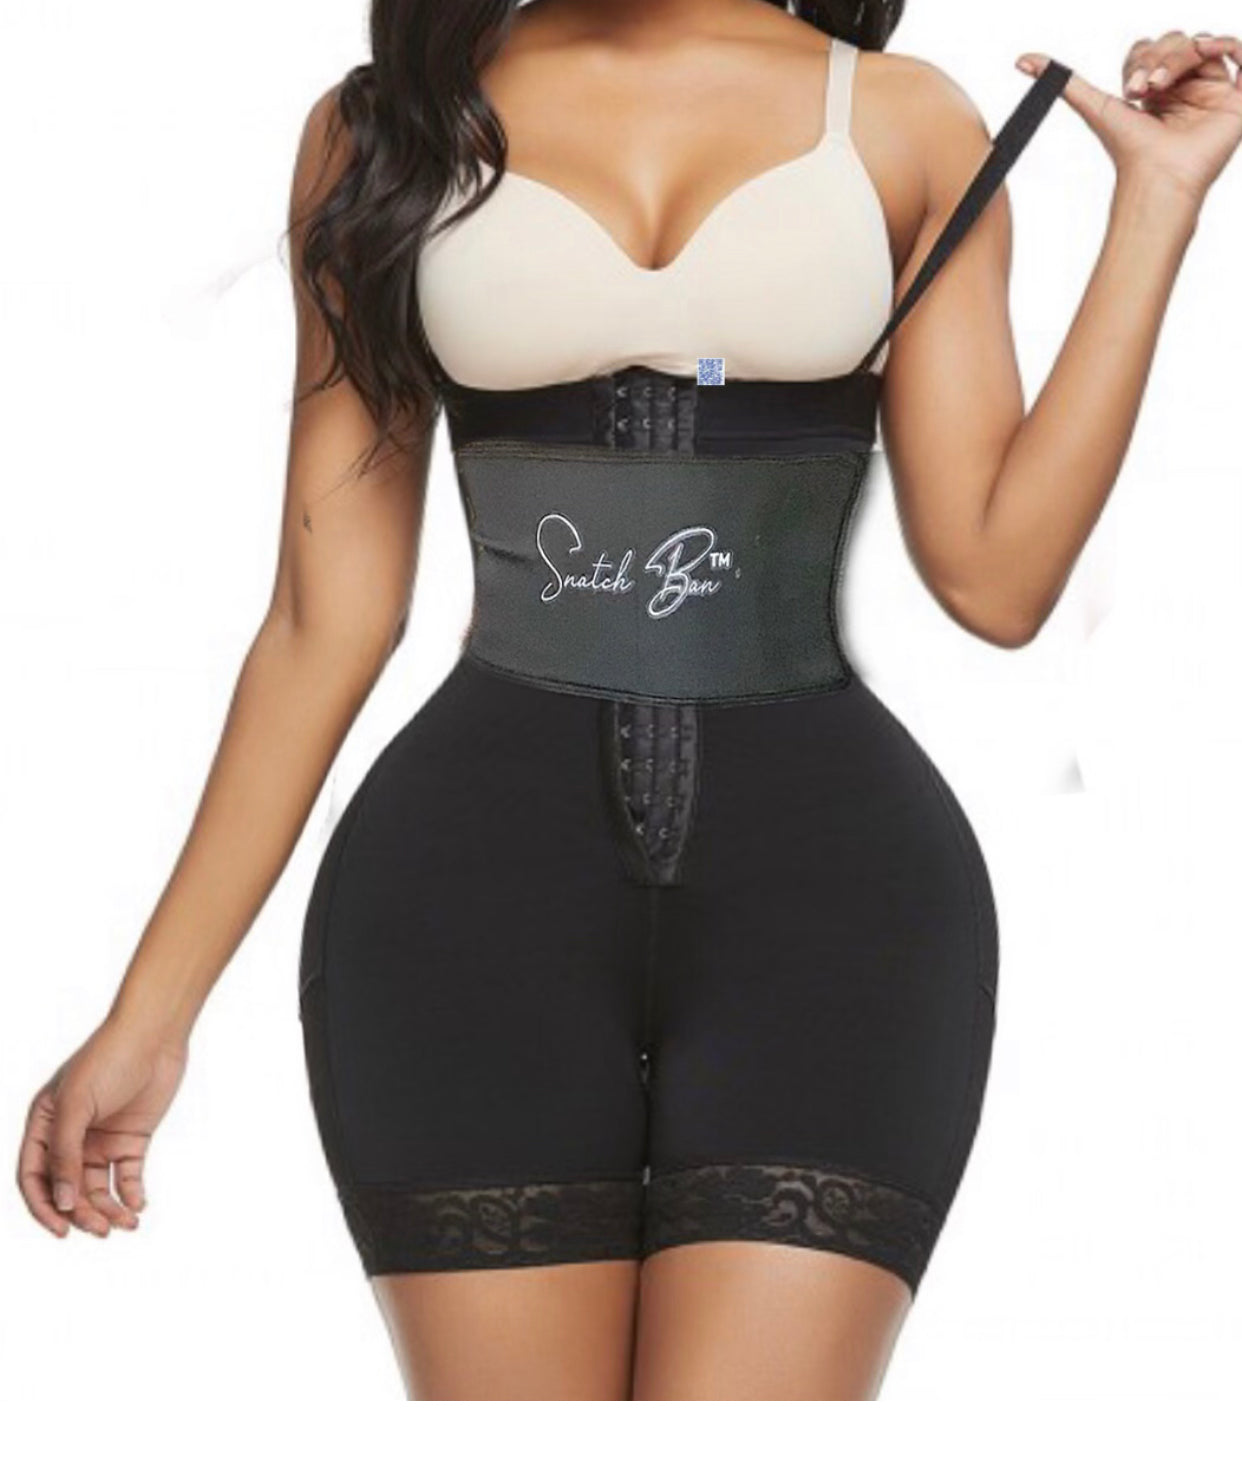 2021  Exquisite CHOOSE YOUR WAIST SNATCHER Black Full Body Shaper with Snatch Ban (Extreme Snatch) 10 - Snatch Bans